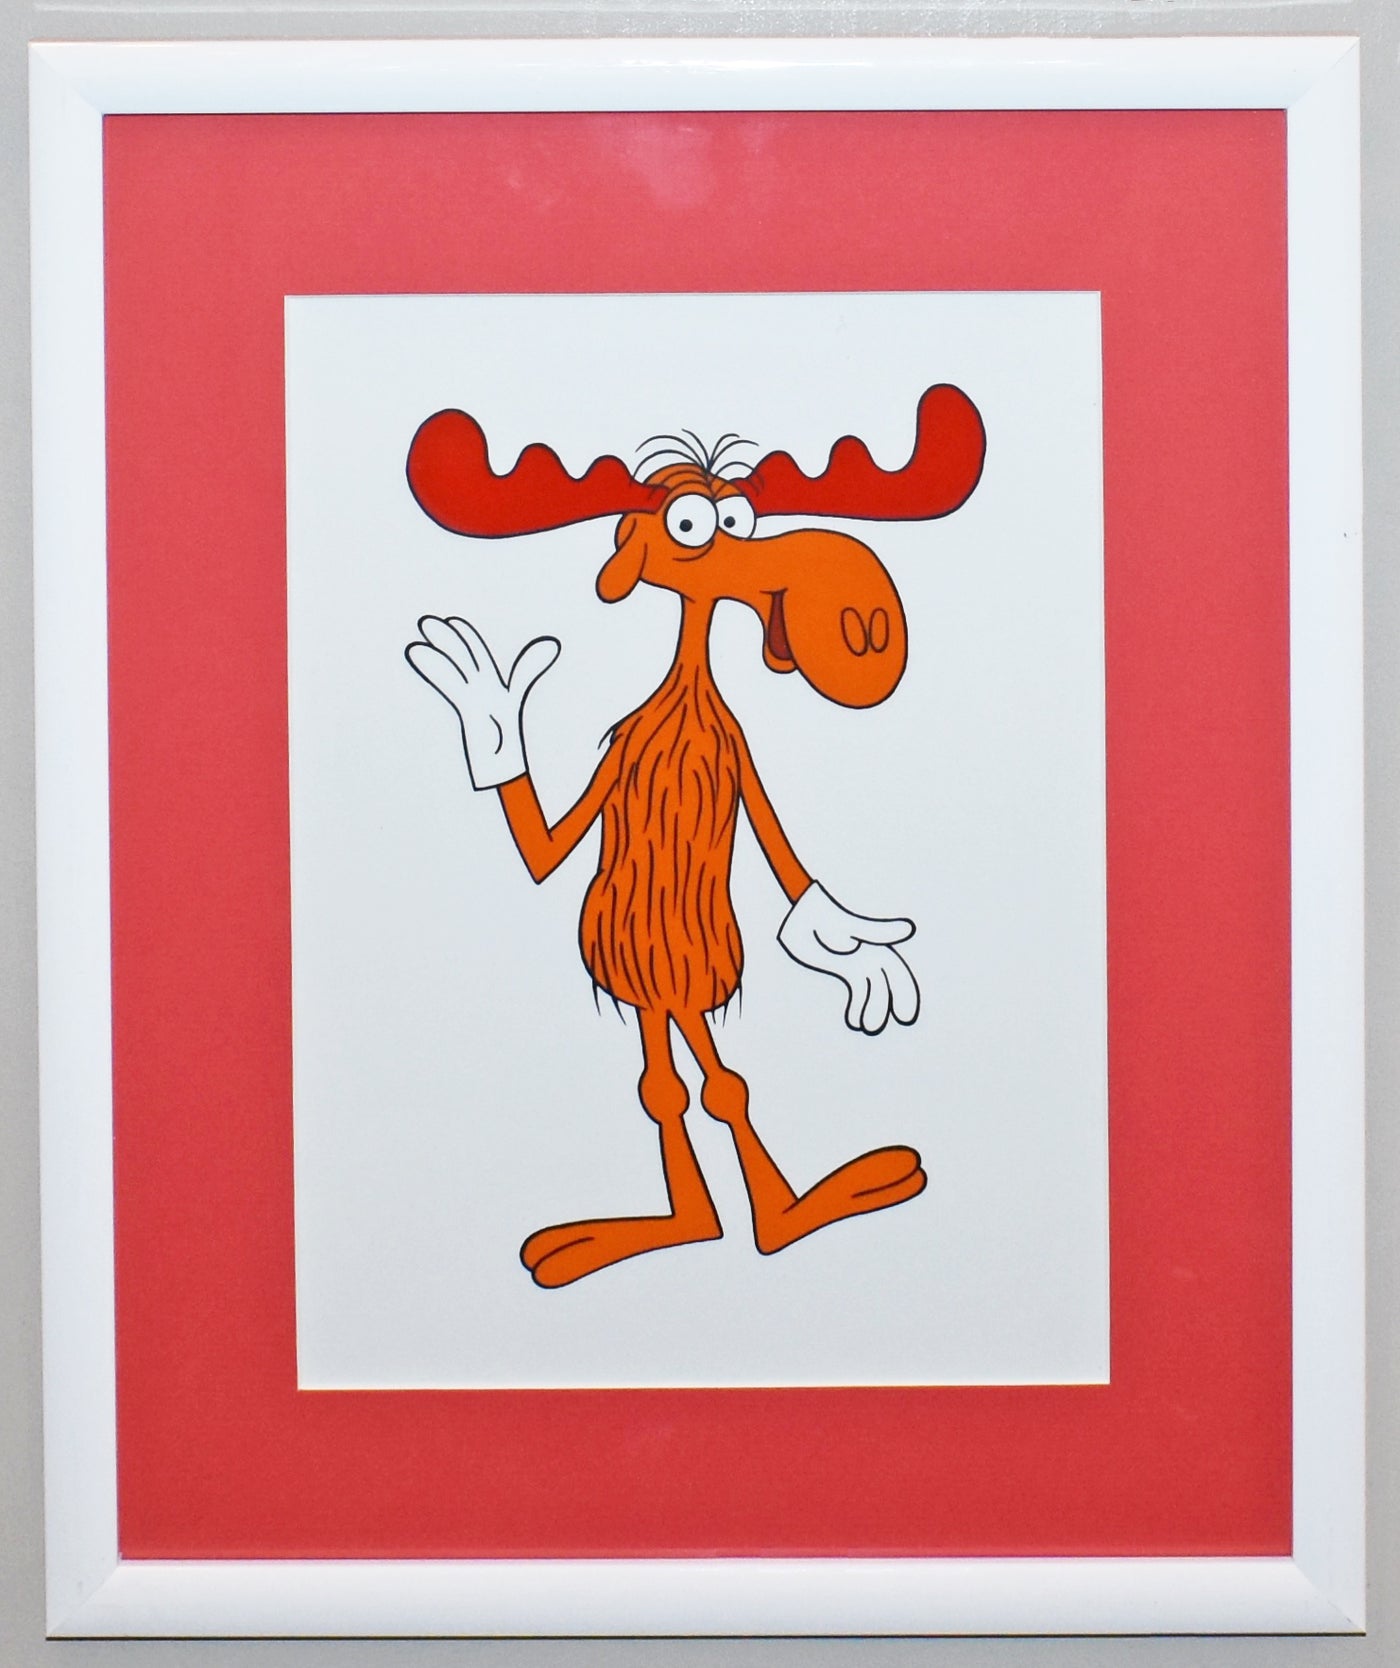 Original Jay Ward Productions Production Cel featuring Bullwinkle